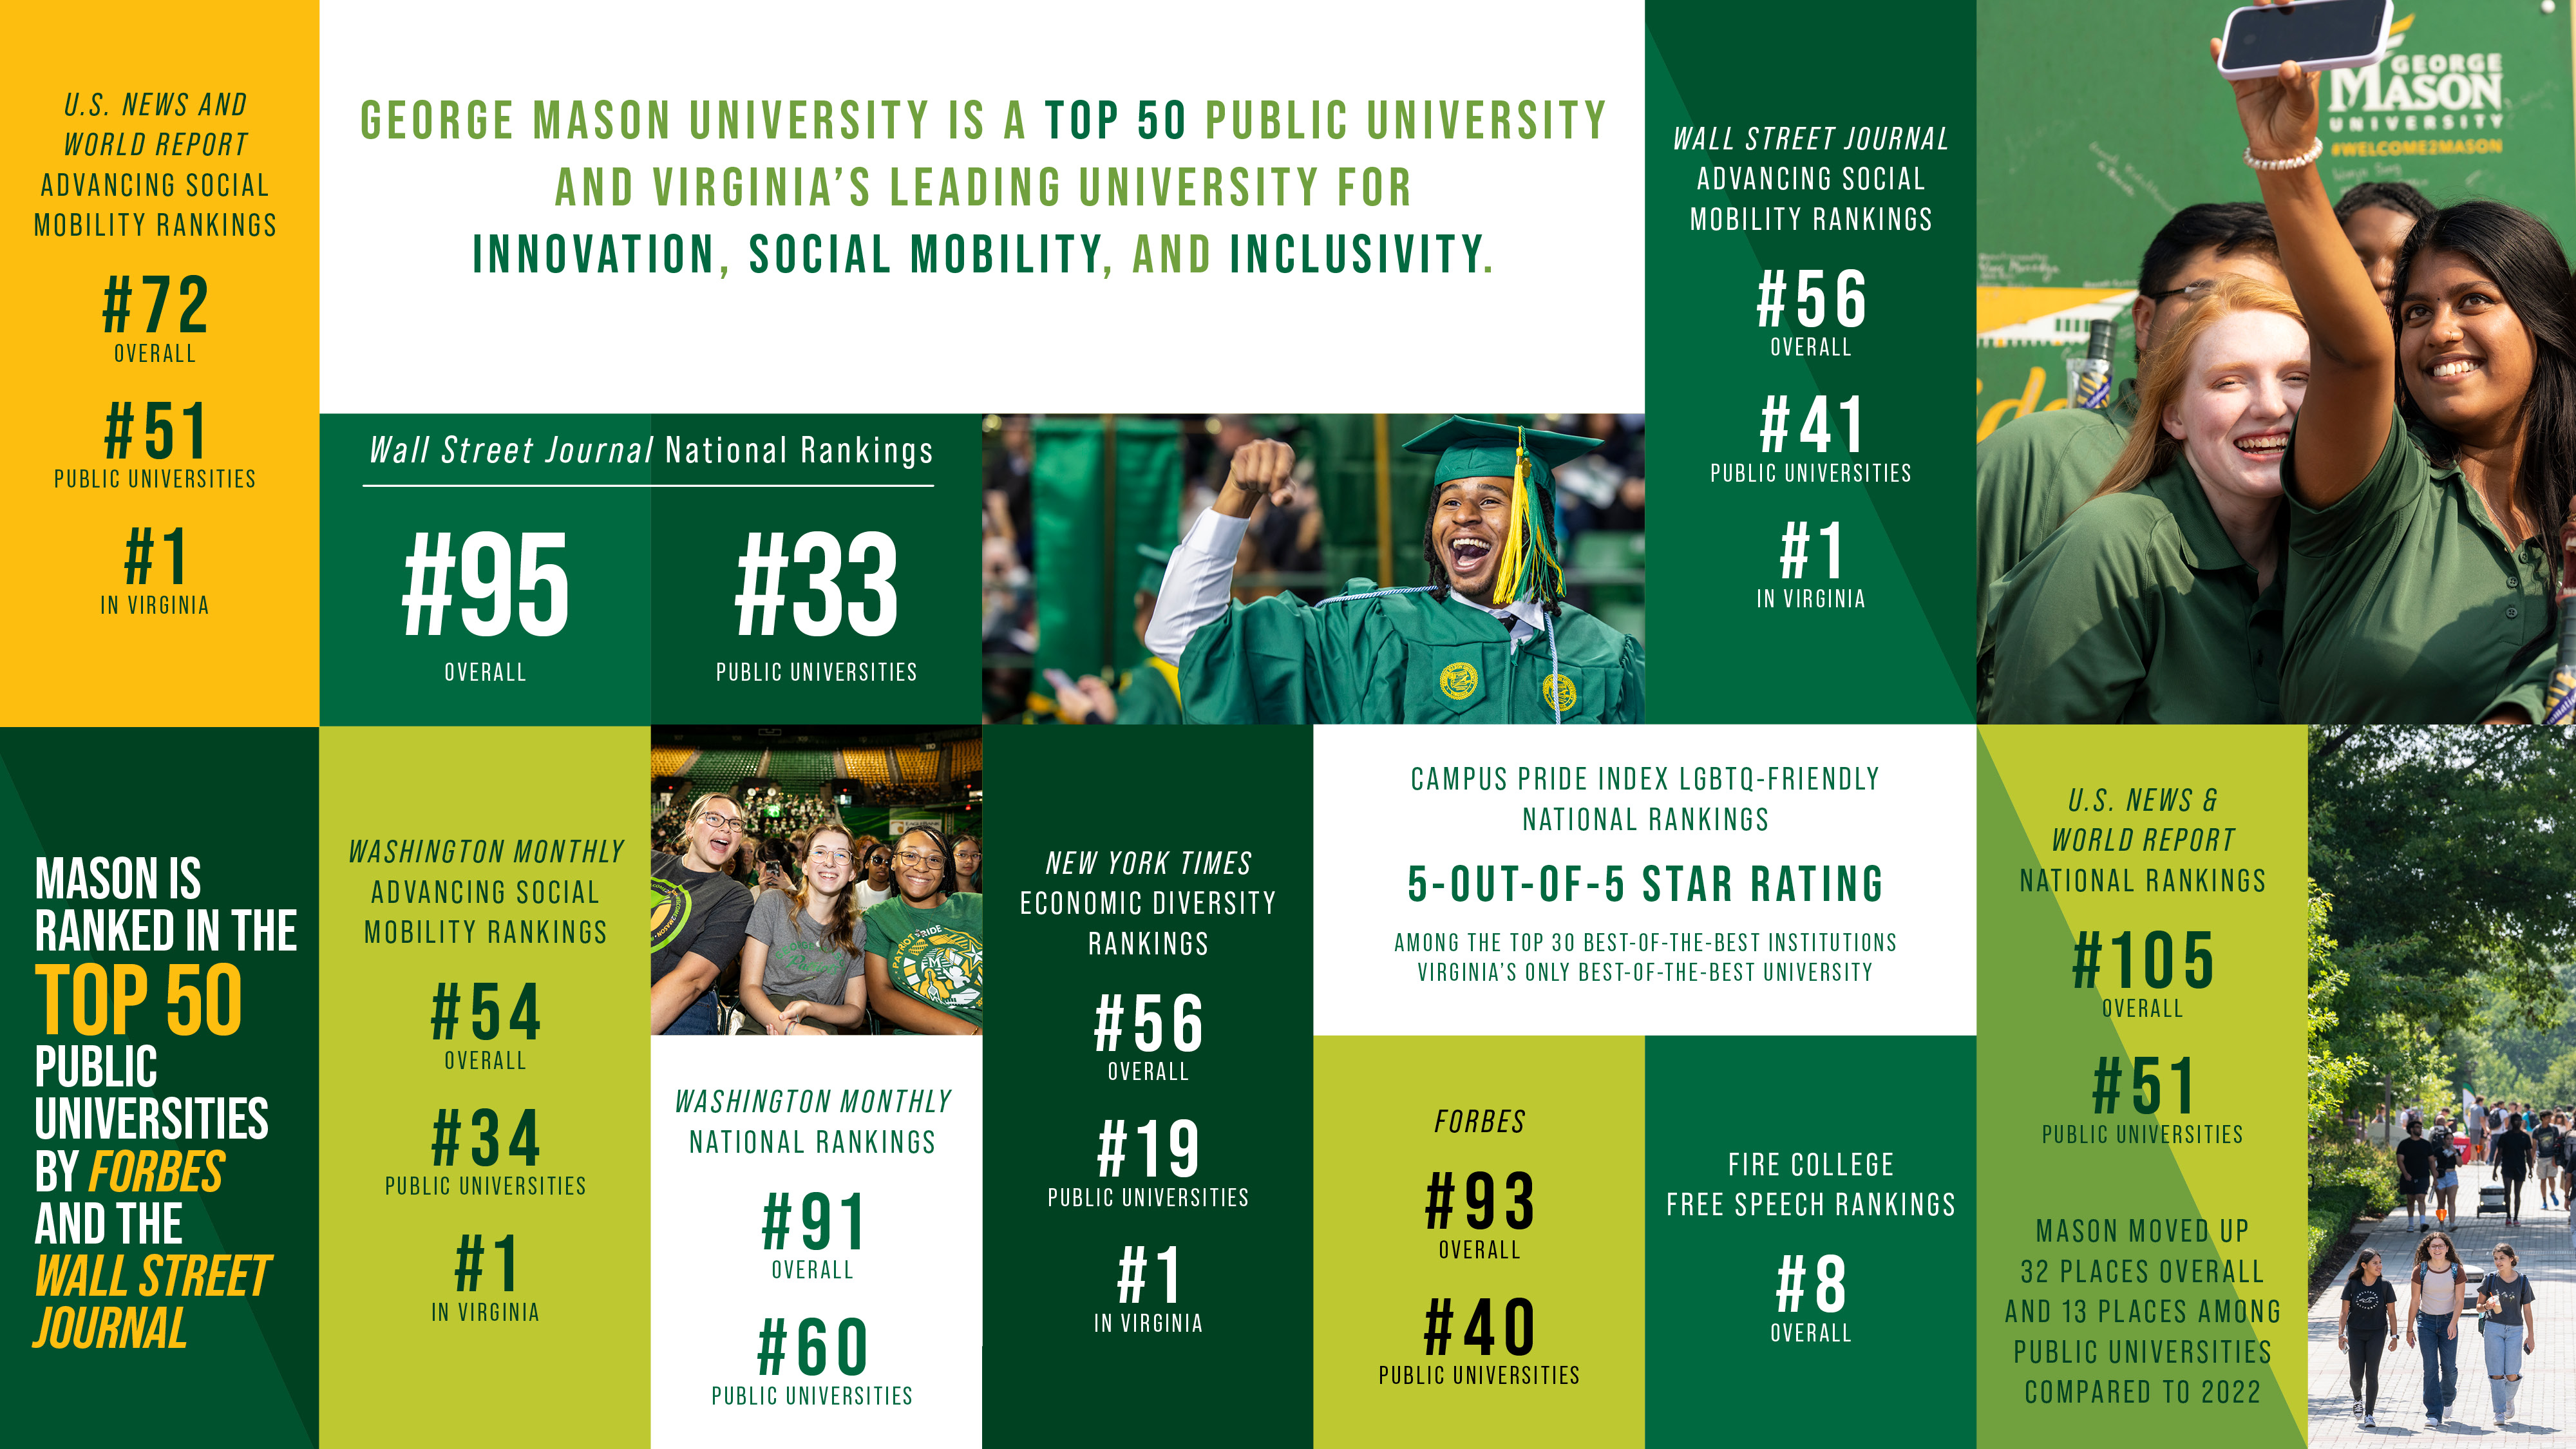 Infographic with many statistics. Summary is that George Mason University is a top 50 public university and Virginia’s leading university for innovation, social mobility, and inclusivity. Ranked in the top 50 public universities by Forbes and the Wall Street Journal. Mason received 5 out of 5 star rating in the Campus Pride Index LGBTQ-friendly national rankings.